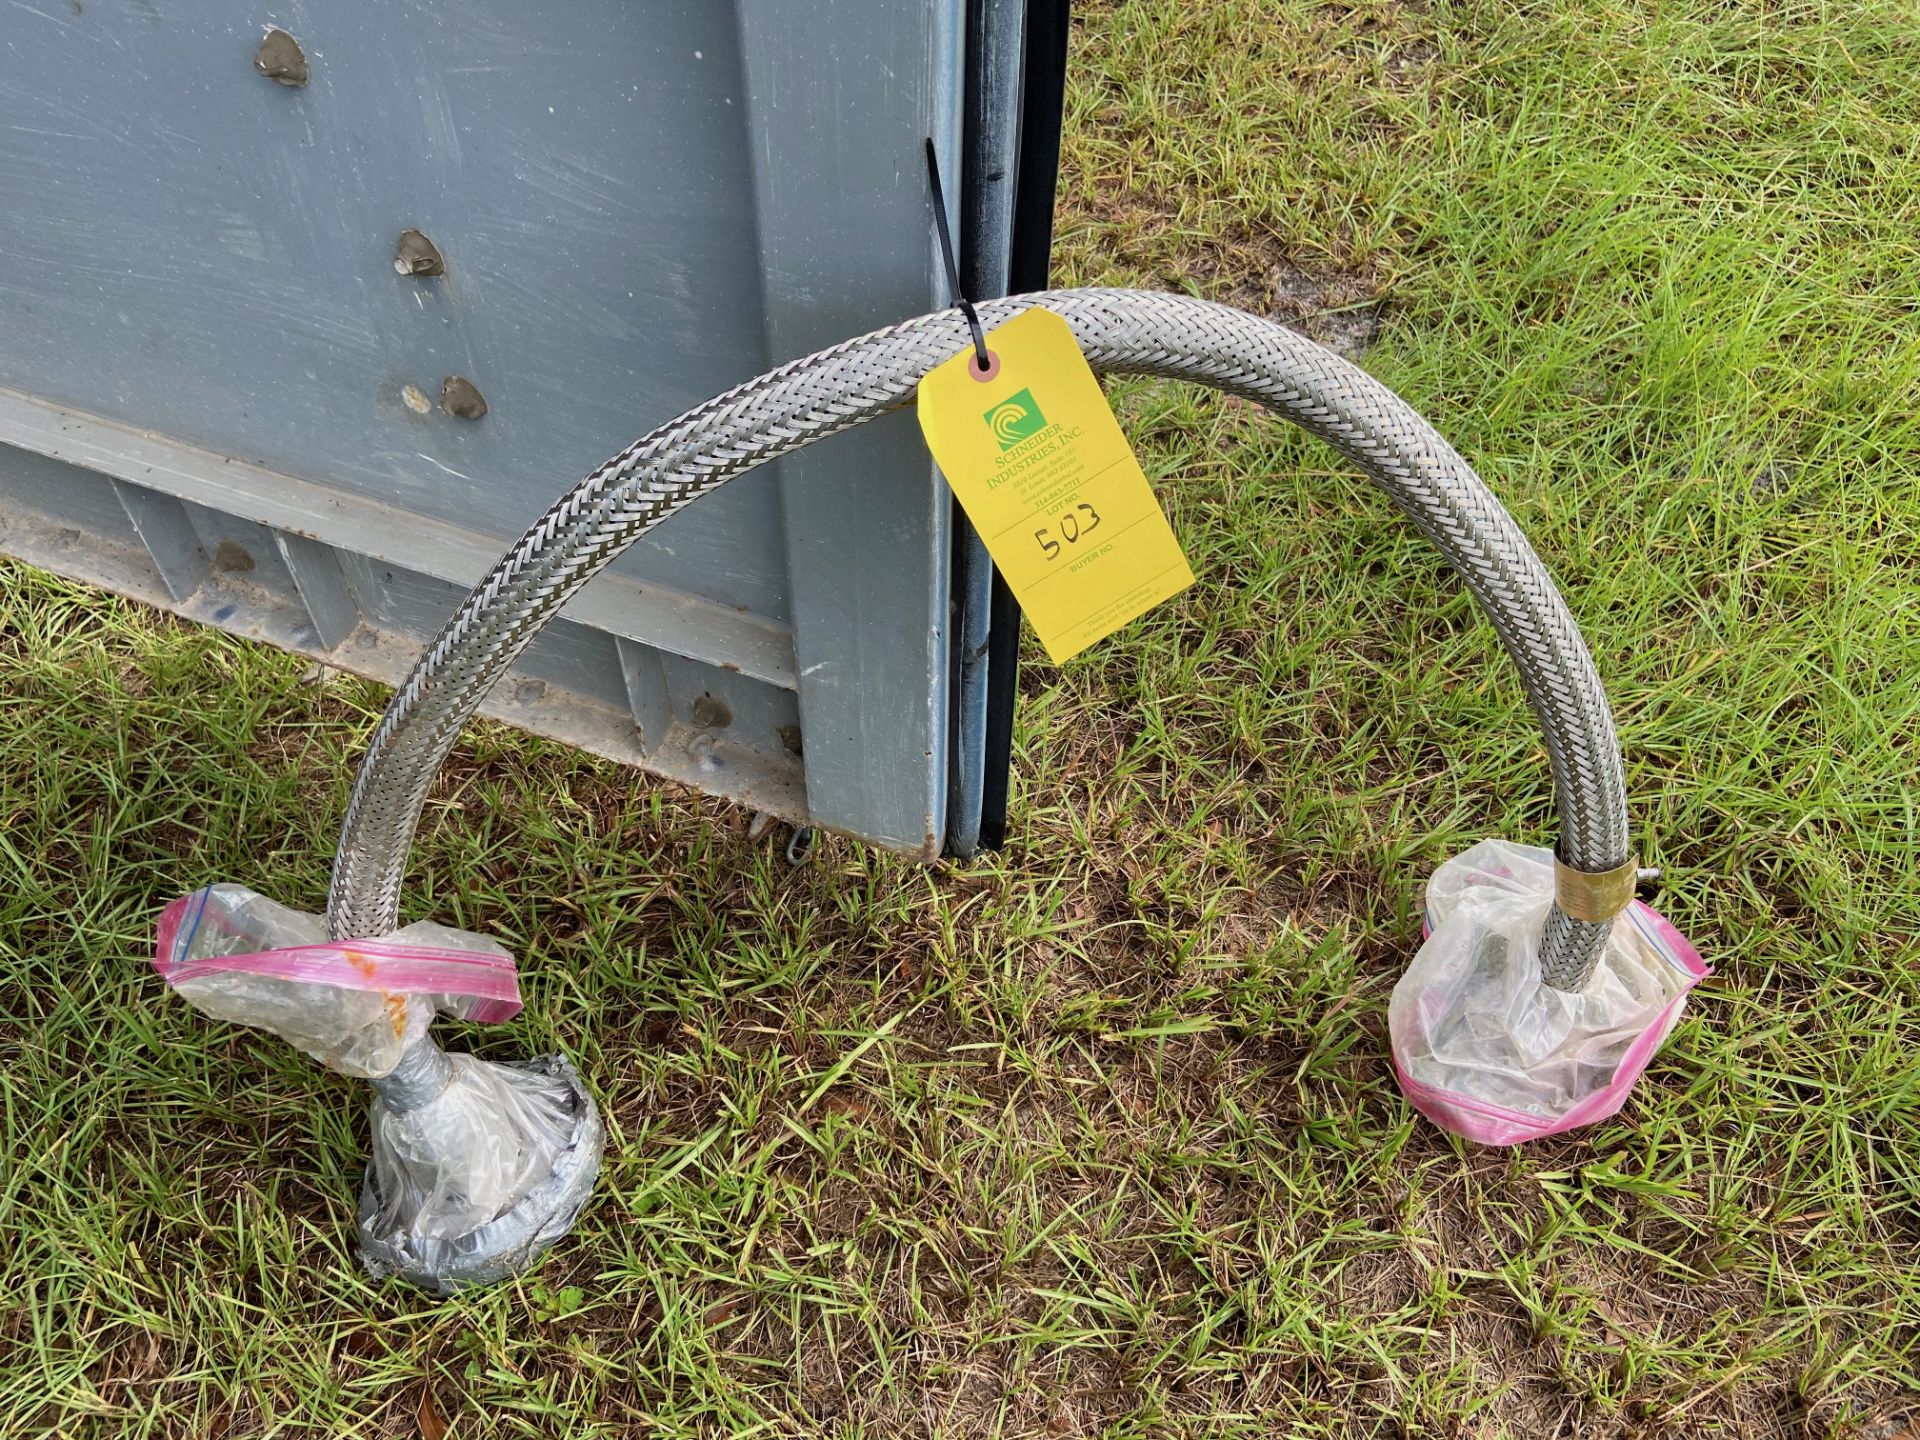 Braided Stainless Steel Flexible Hose, 5' Long x 1.5" Diameter, (Located in Perry, FL) (Rigging &